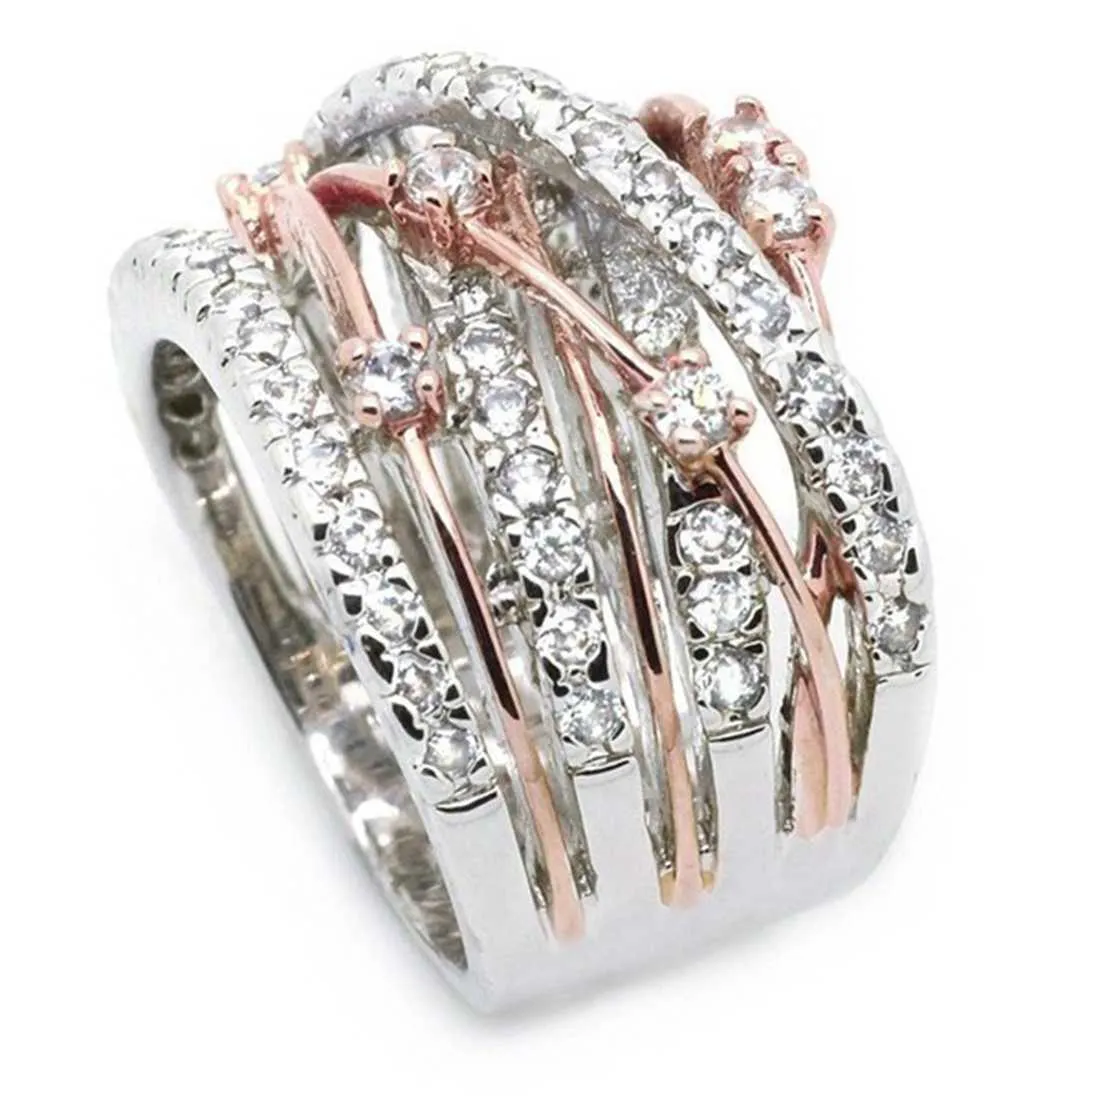 Silver Color Rose Gold Band Rings for Women Wedding Engagement Fashion Jewelry 2019 New X07153155051